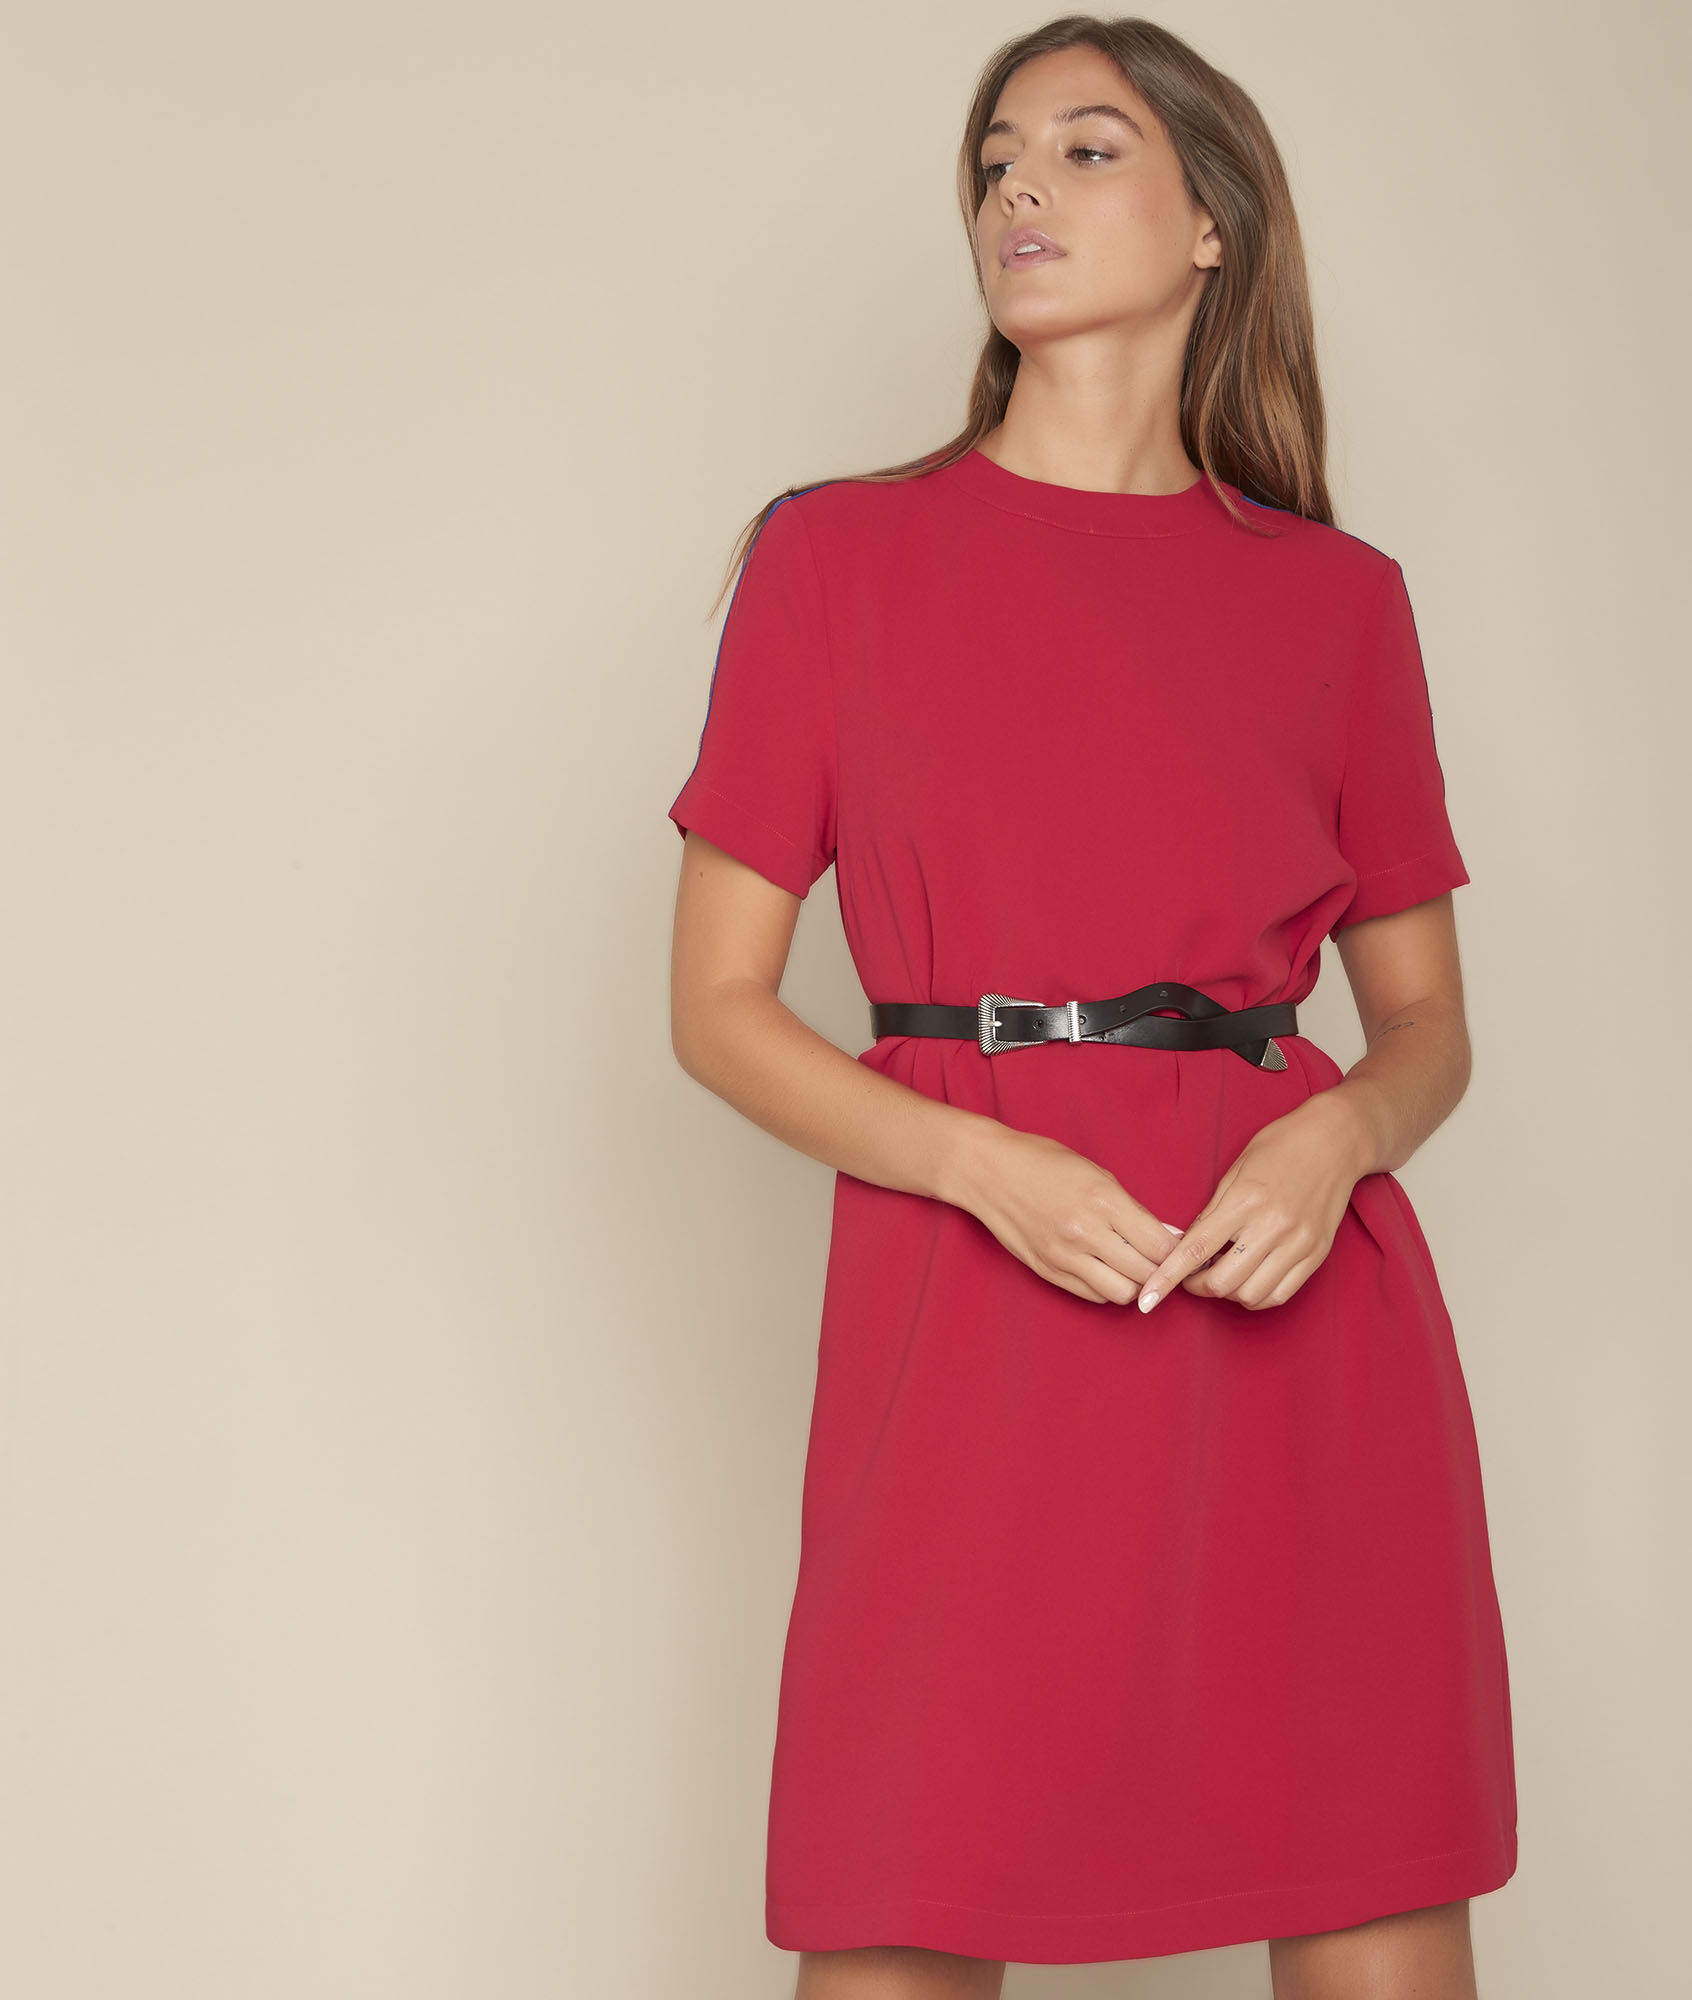 red shift dress with sleeves